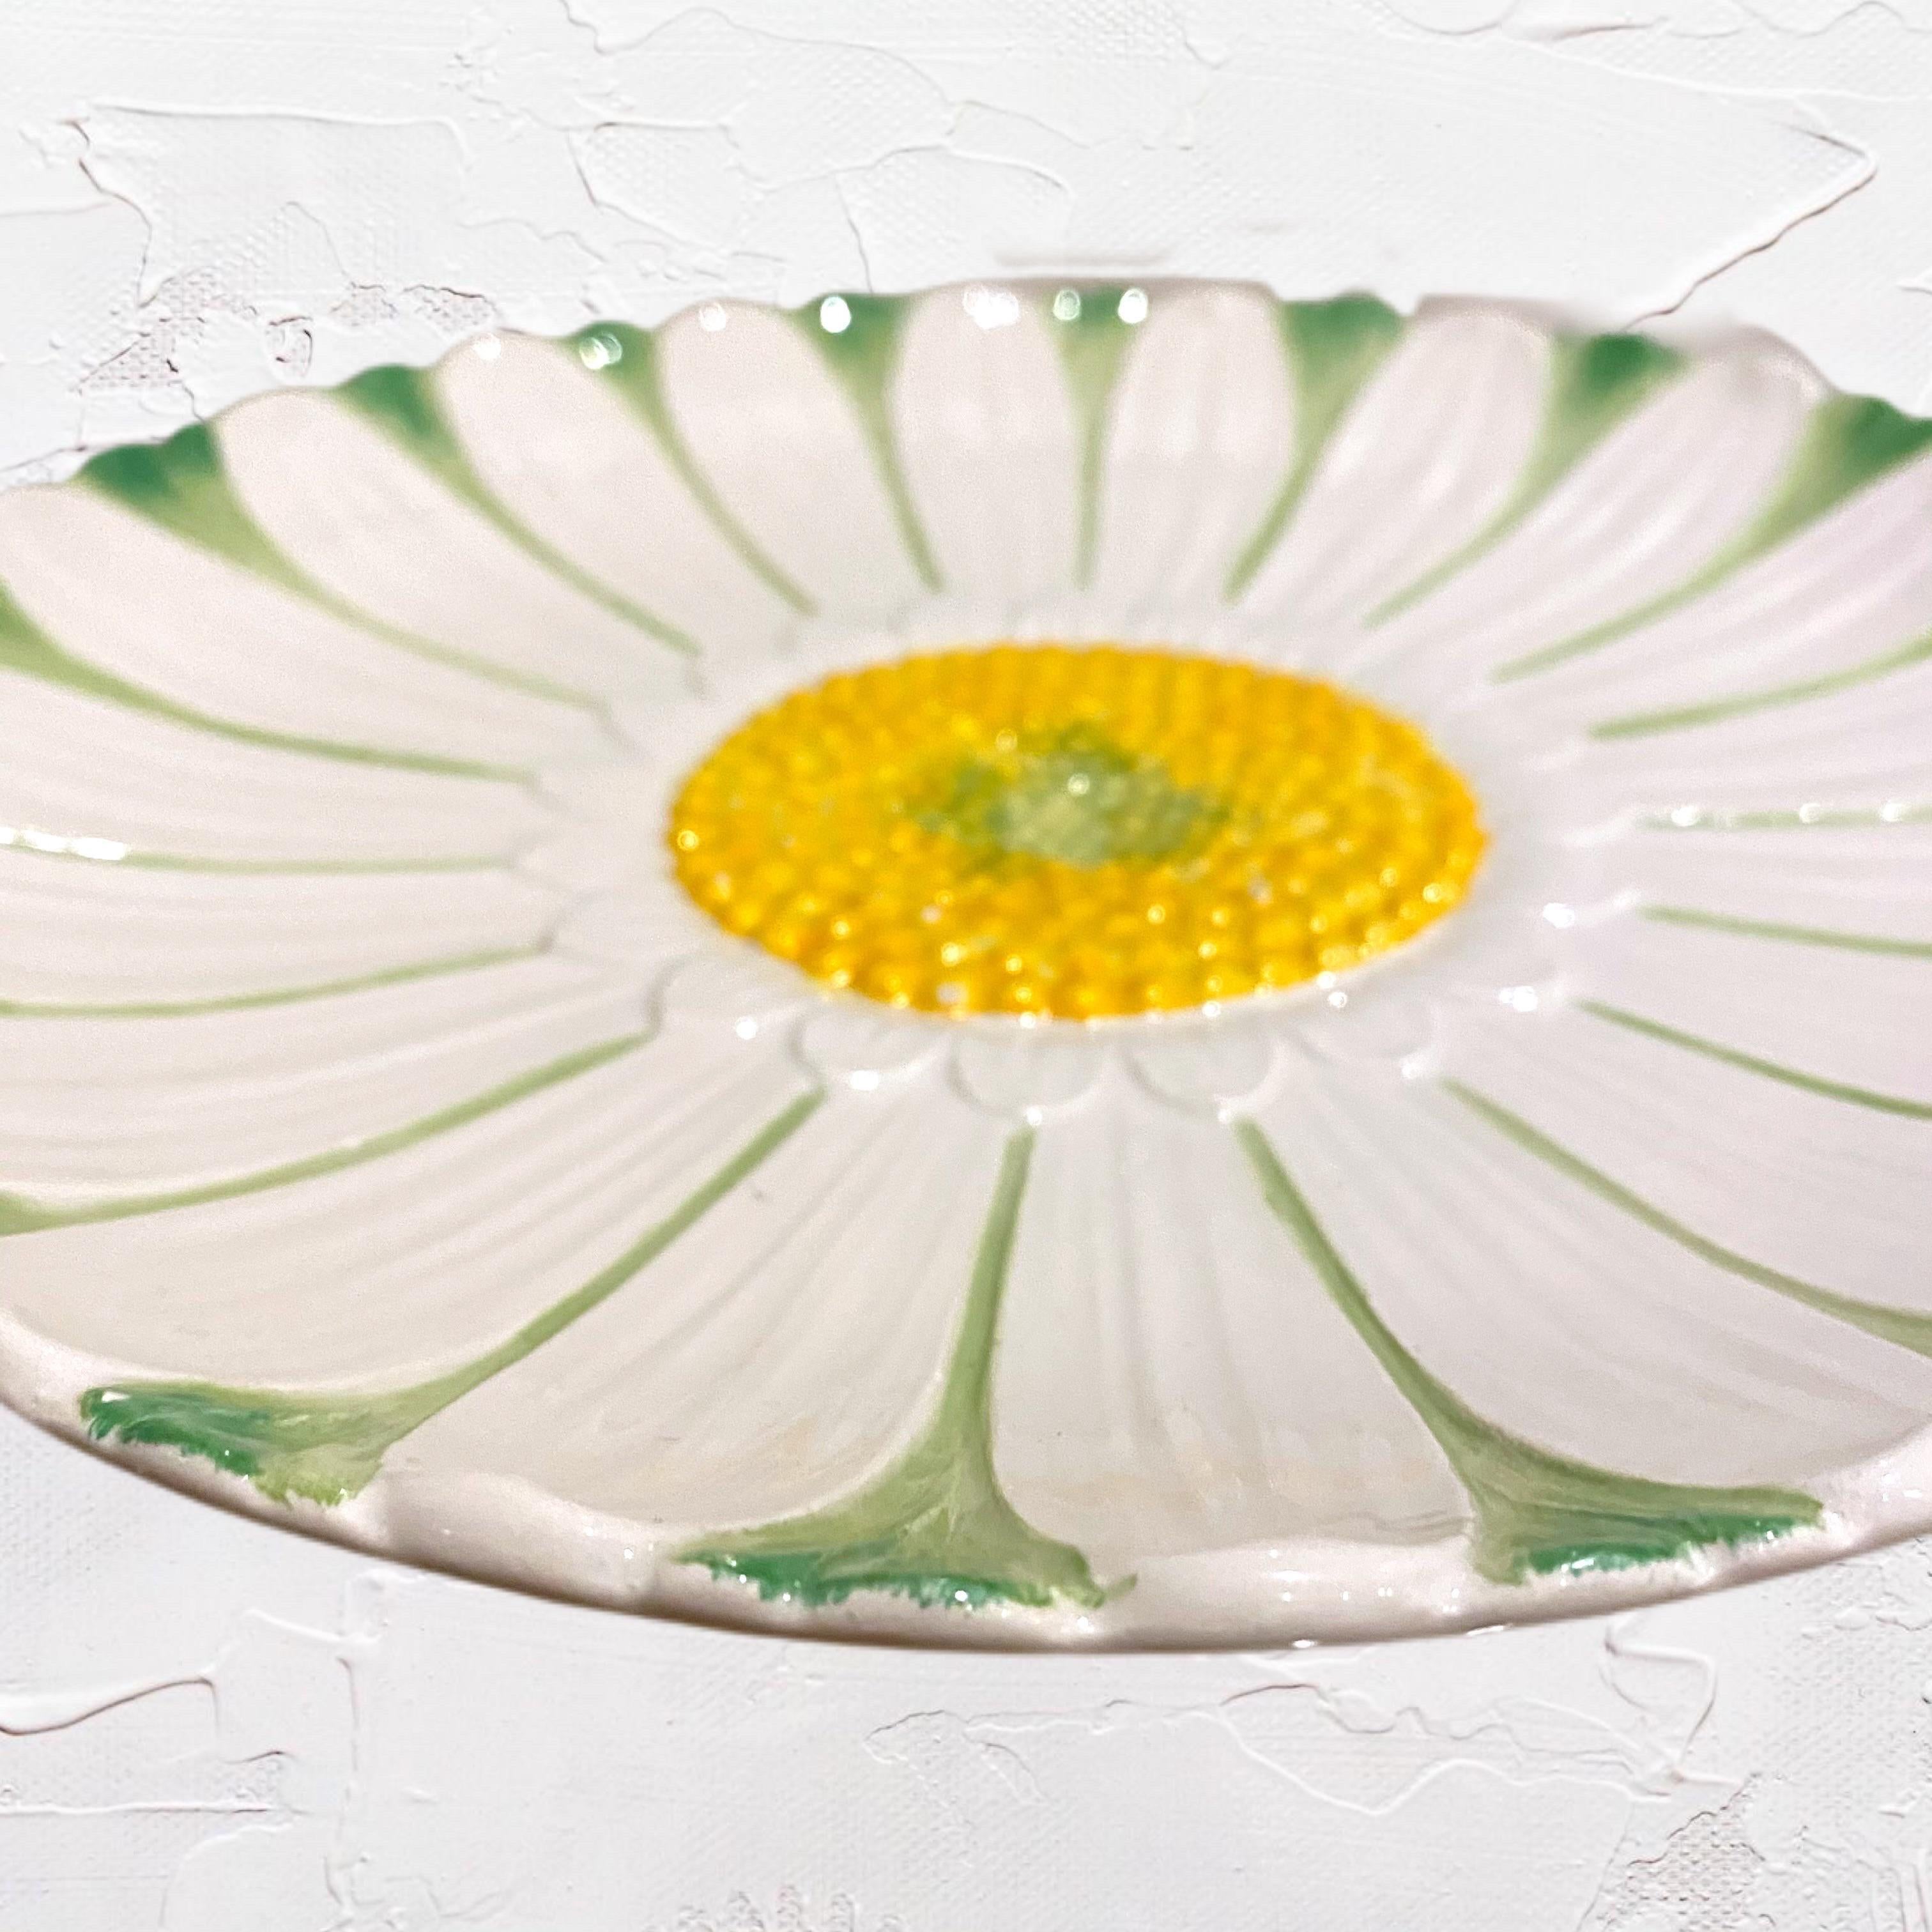 Handpainted majolica pottery daisy plates provide a charming presentation for your food or use as a catchall or hang it on the wall!  
